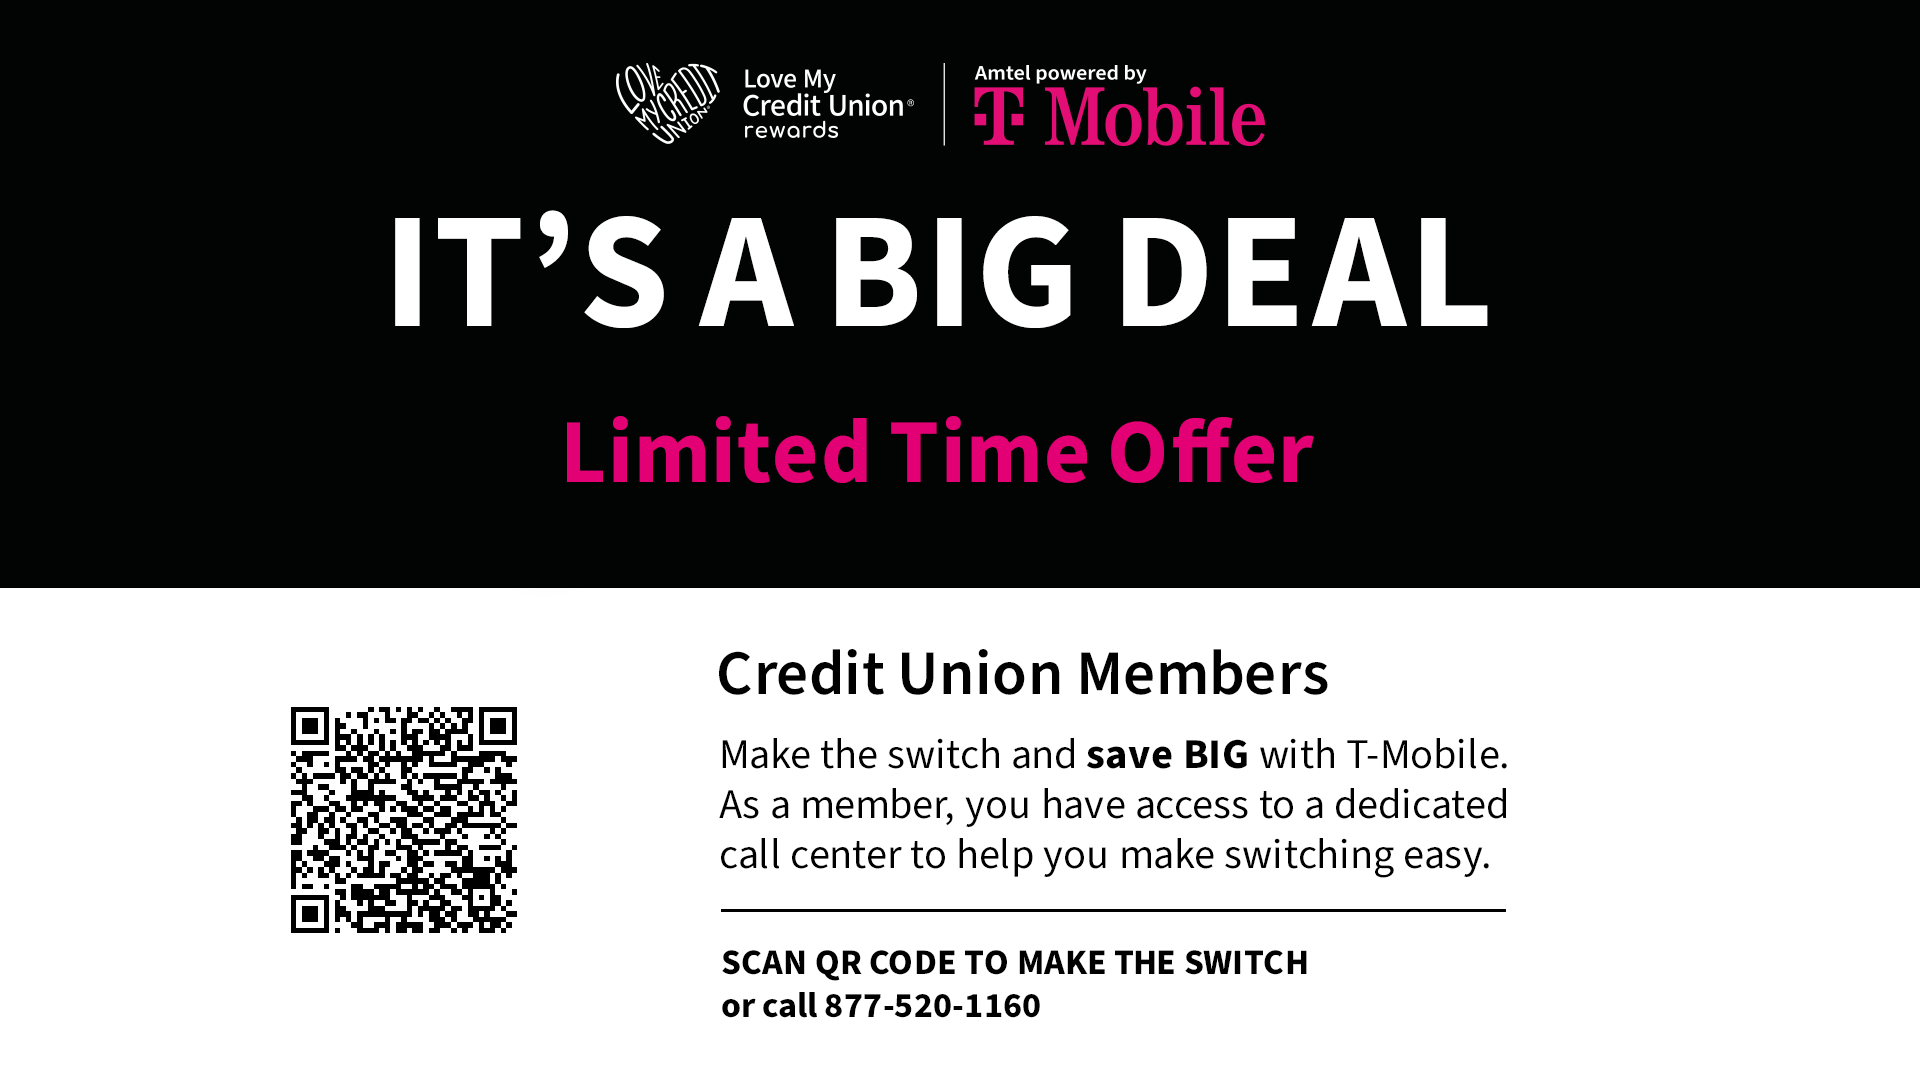 Love My Credit Union Rewards banner for a T-Mobile deal. Make the switch and save BIG with T-Mobile. Call 877-520-1160.